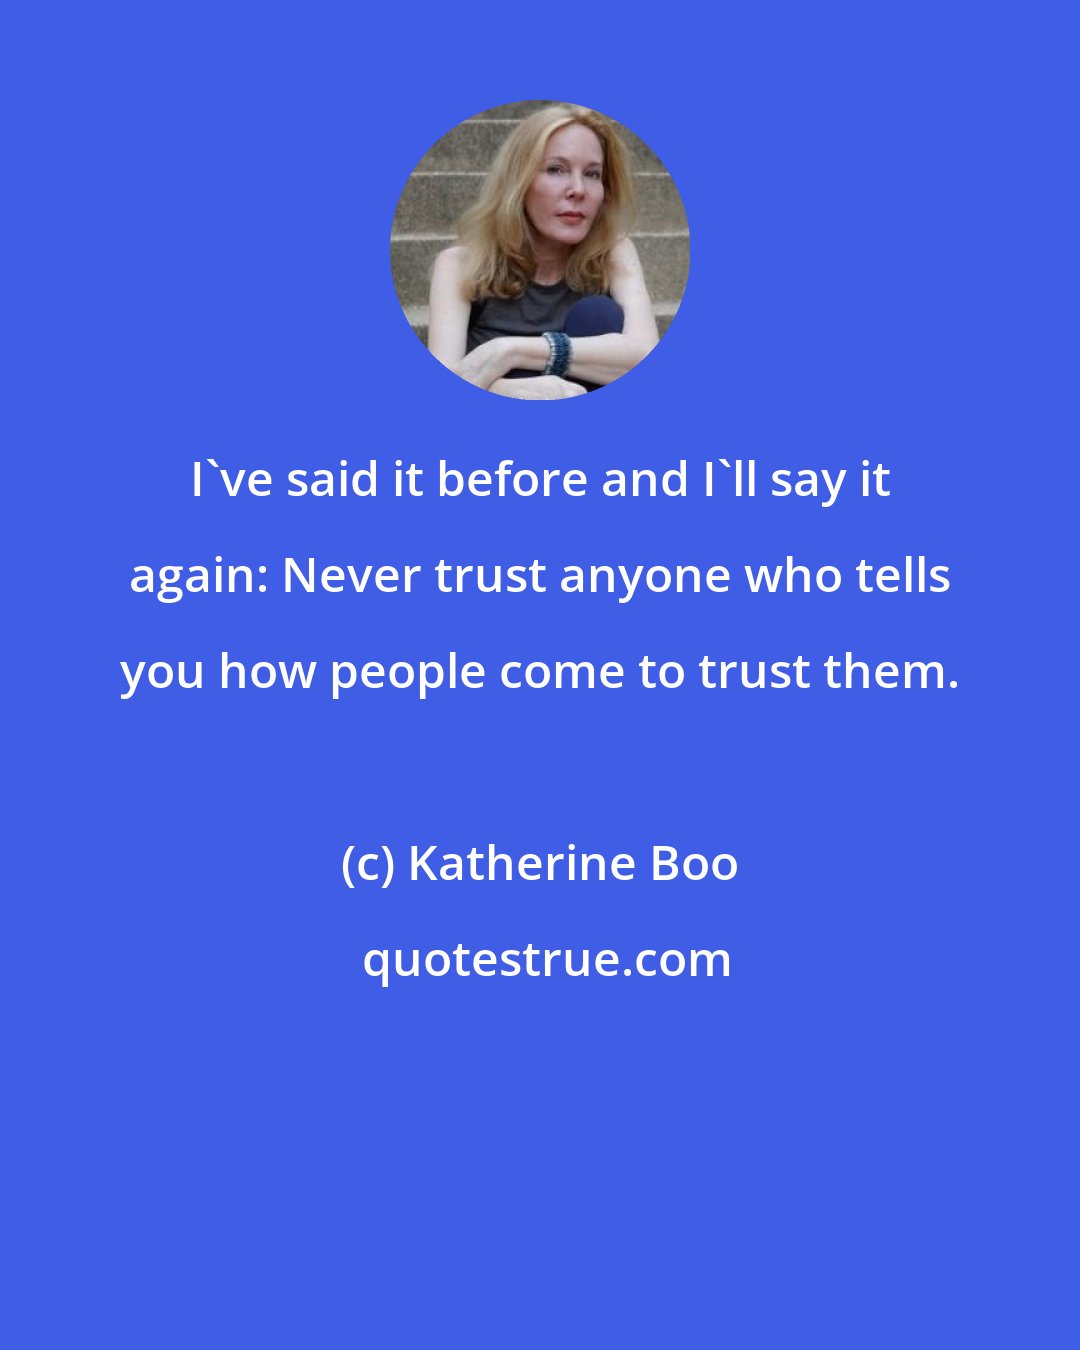 Katherine Boo: I've said it before and I'll say it again: Never trust anyone who tells you how people come to trust them.